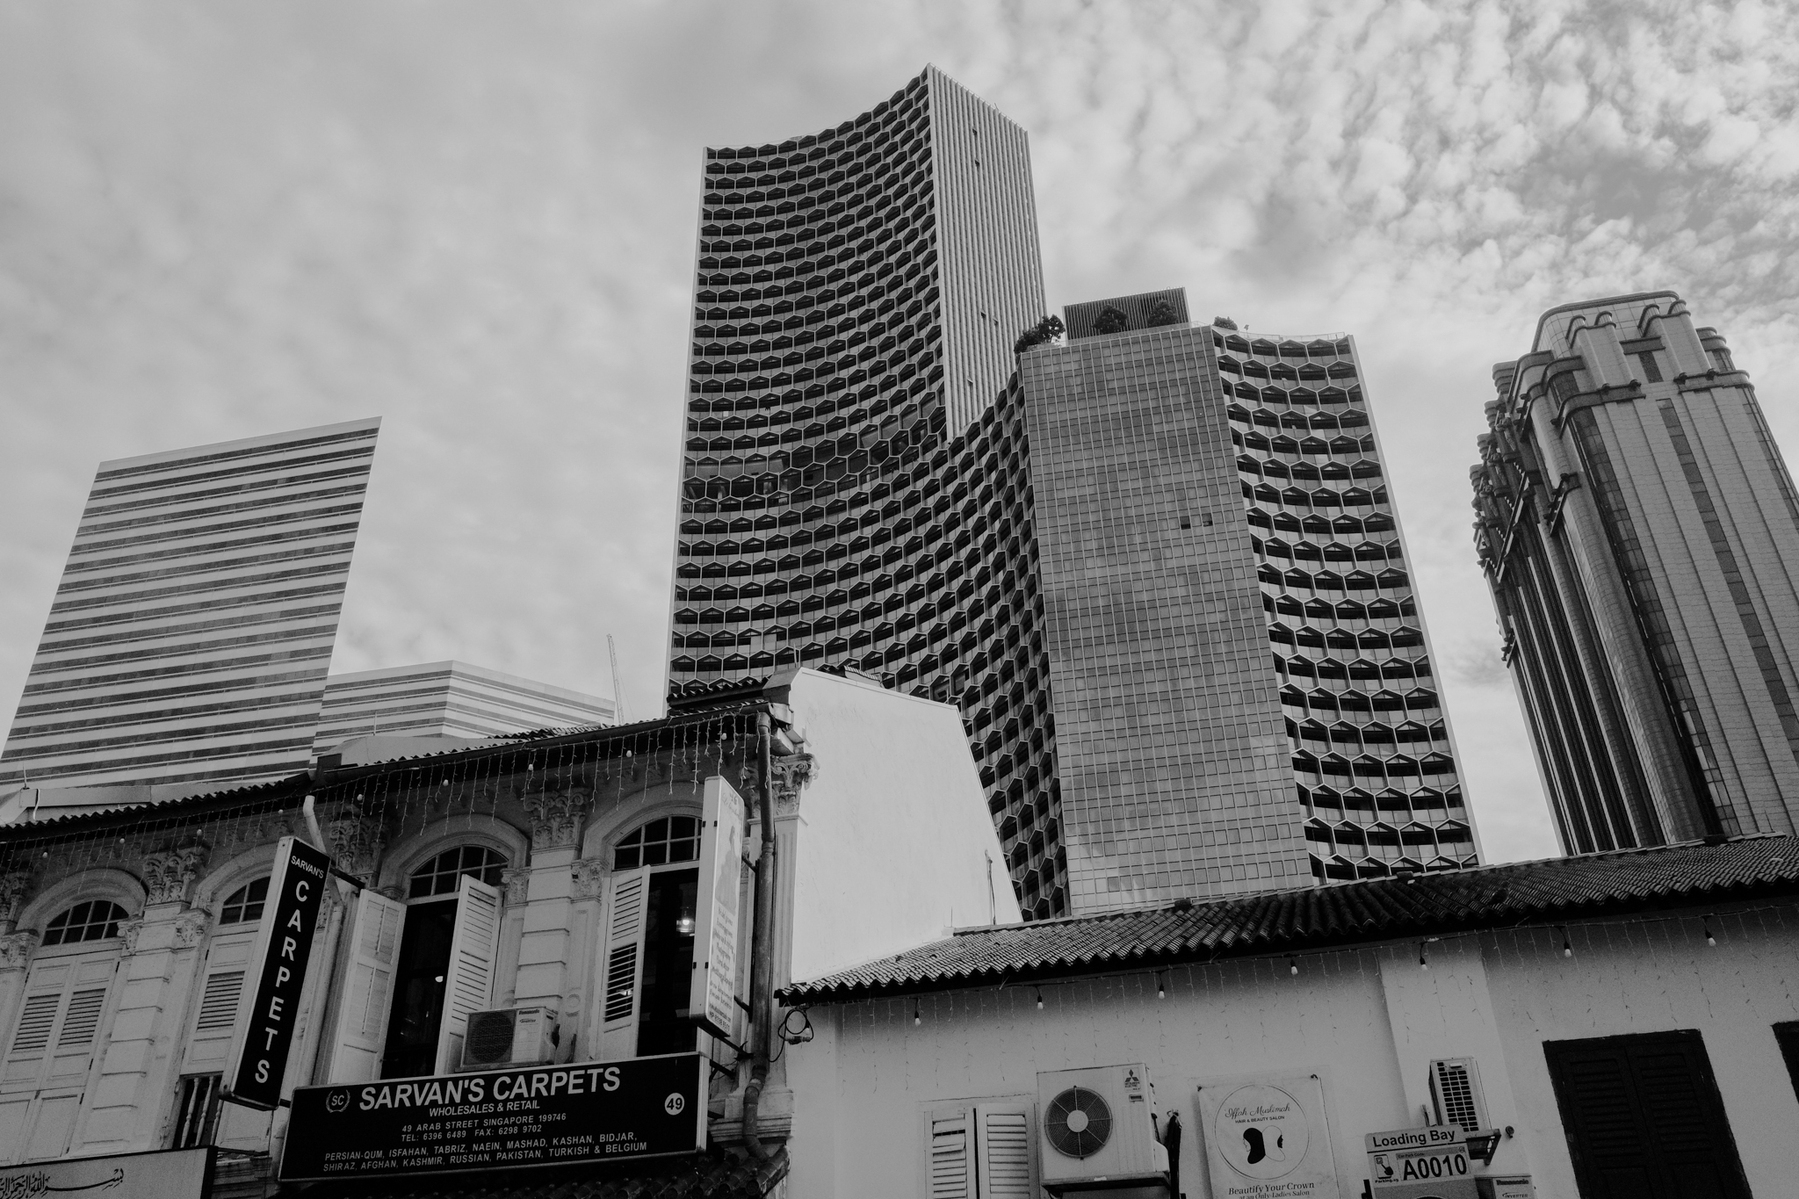 a black and white photo showing a contrast of architecture between old and new